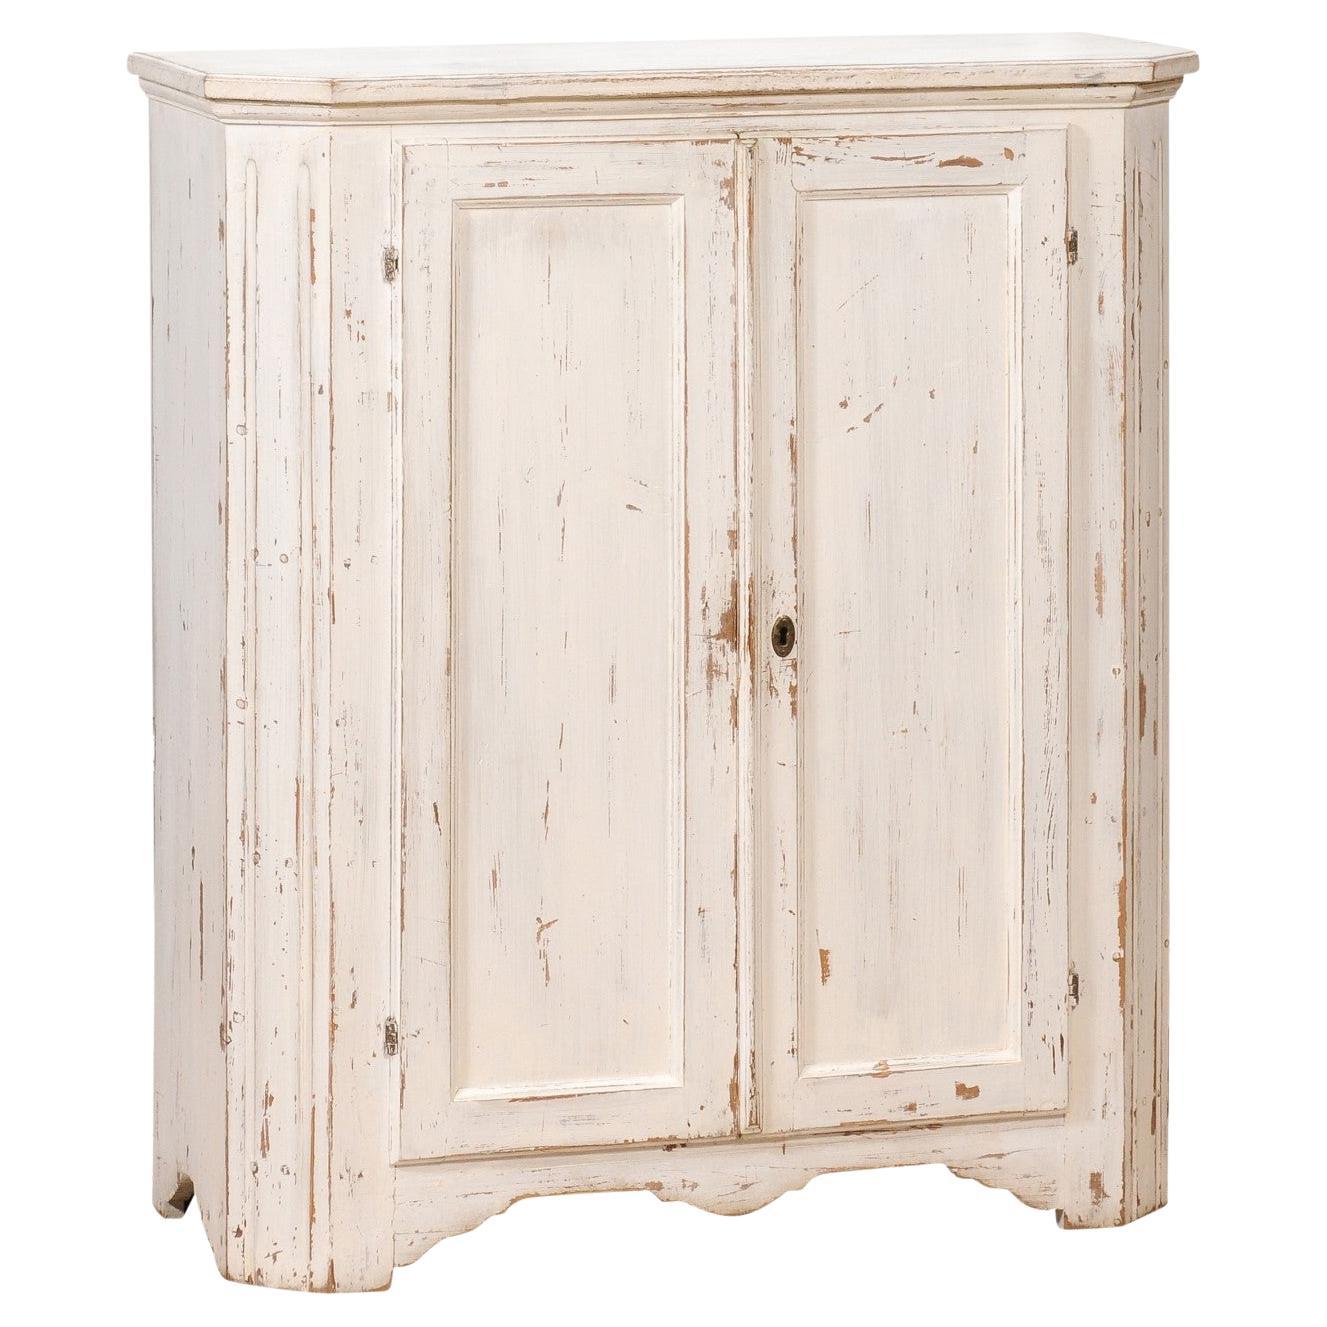 1830s Swedish Off-White Painted Wood Narrow Sideboard with Distressed Finish